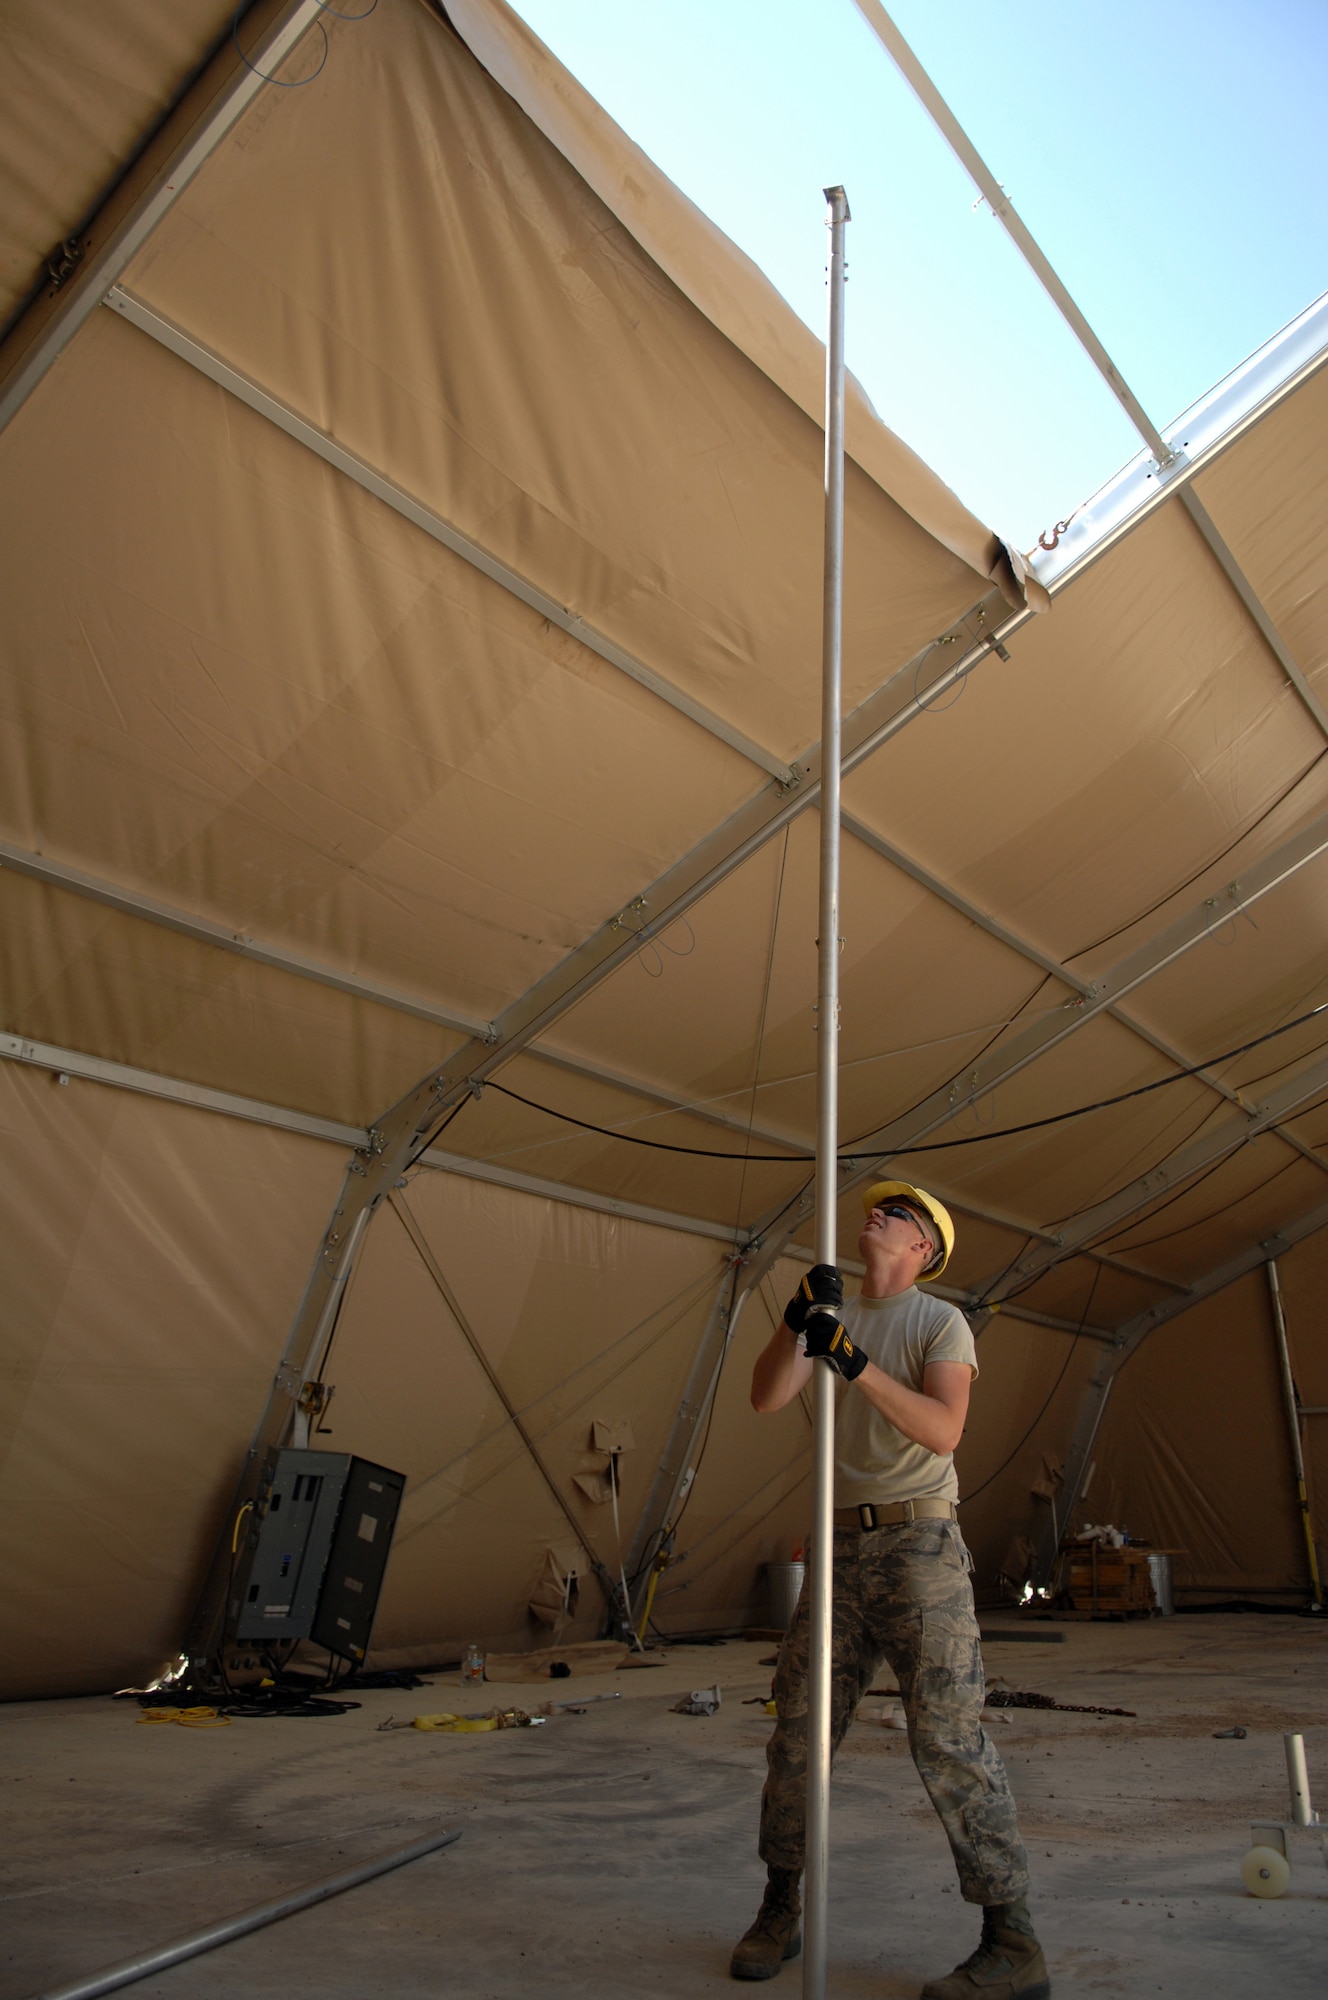 Airman 1st Class Jeremiah Perish from the 49th Civil Engineer Squadron, a student in the new Structural Contingency Course, uses a Purlin installation tube to help pull fabric over the roof frame of the BEAR Base dome shelter June 3 at Holloman Air Force Base, N.M. The fabric has a weather flap on its end which hangs free and can get caught as its being pulled into position. The tube is used to bump the fabric as it?s pulled so it doesn?t get caught. (U.S. Air Force photo/Airman Sondra M. Wieseler)